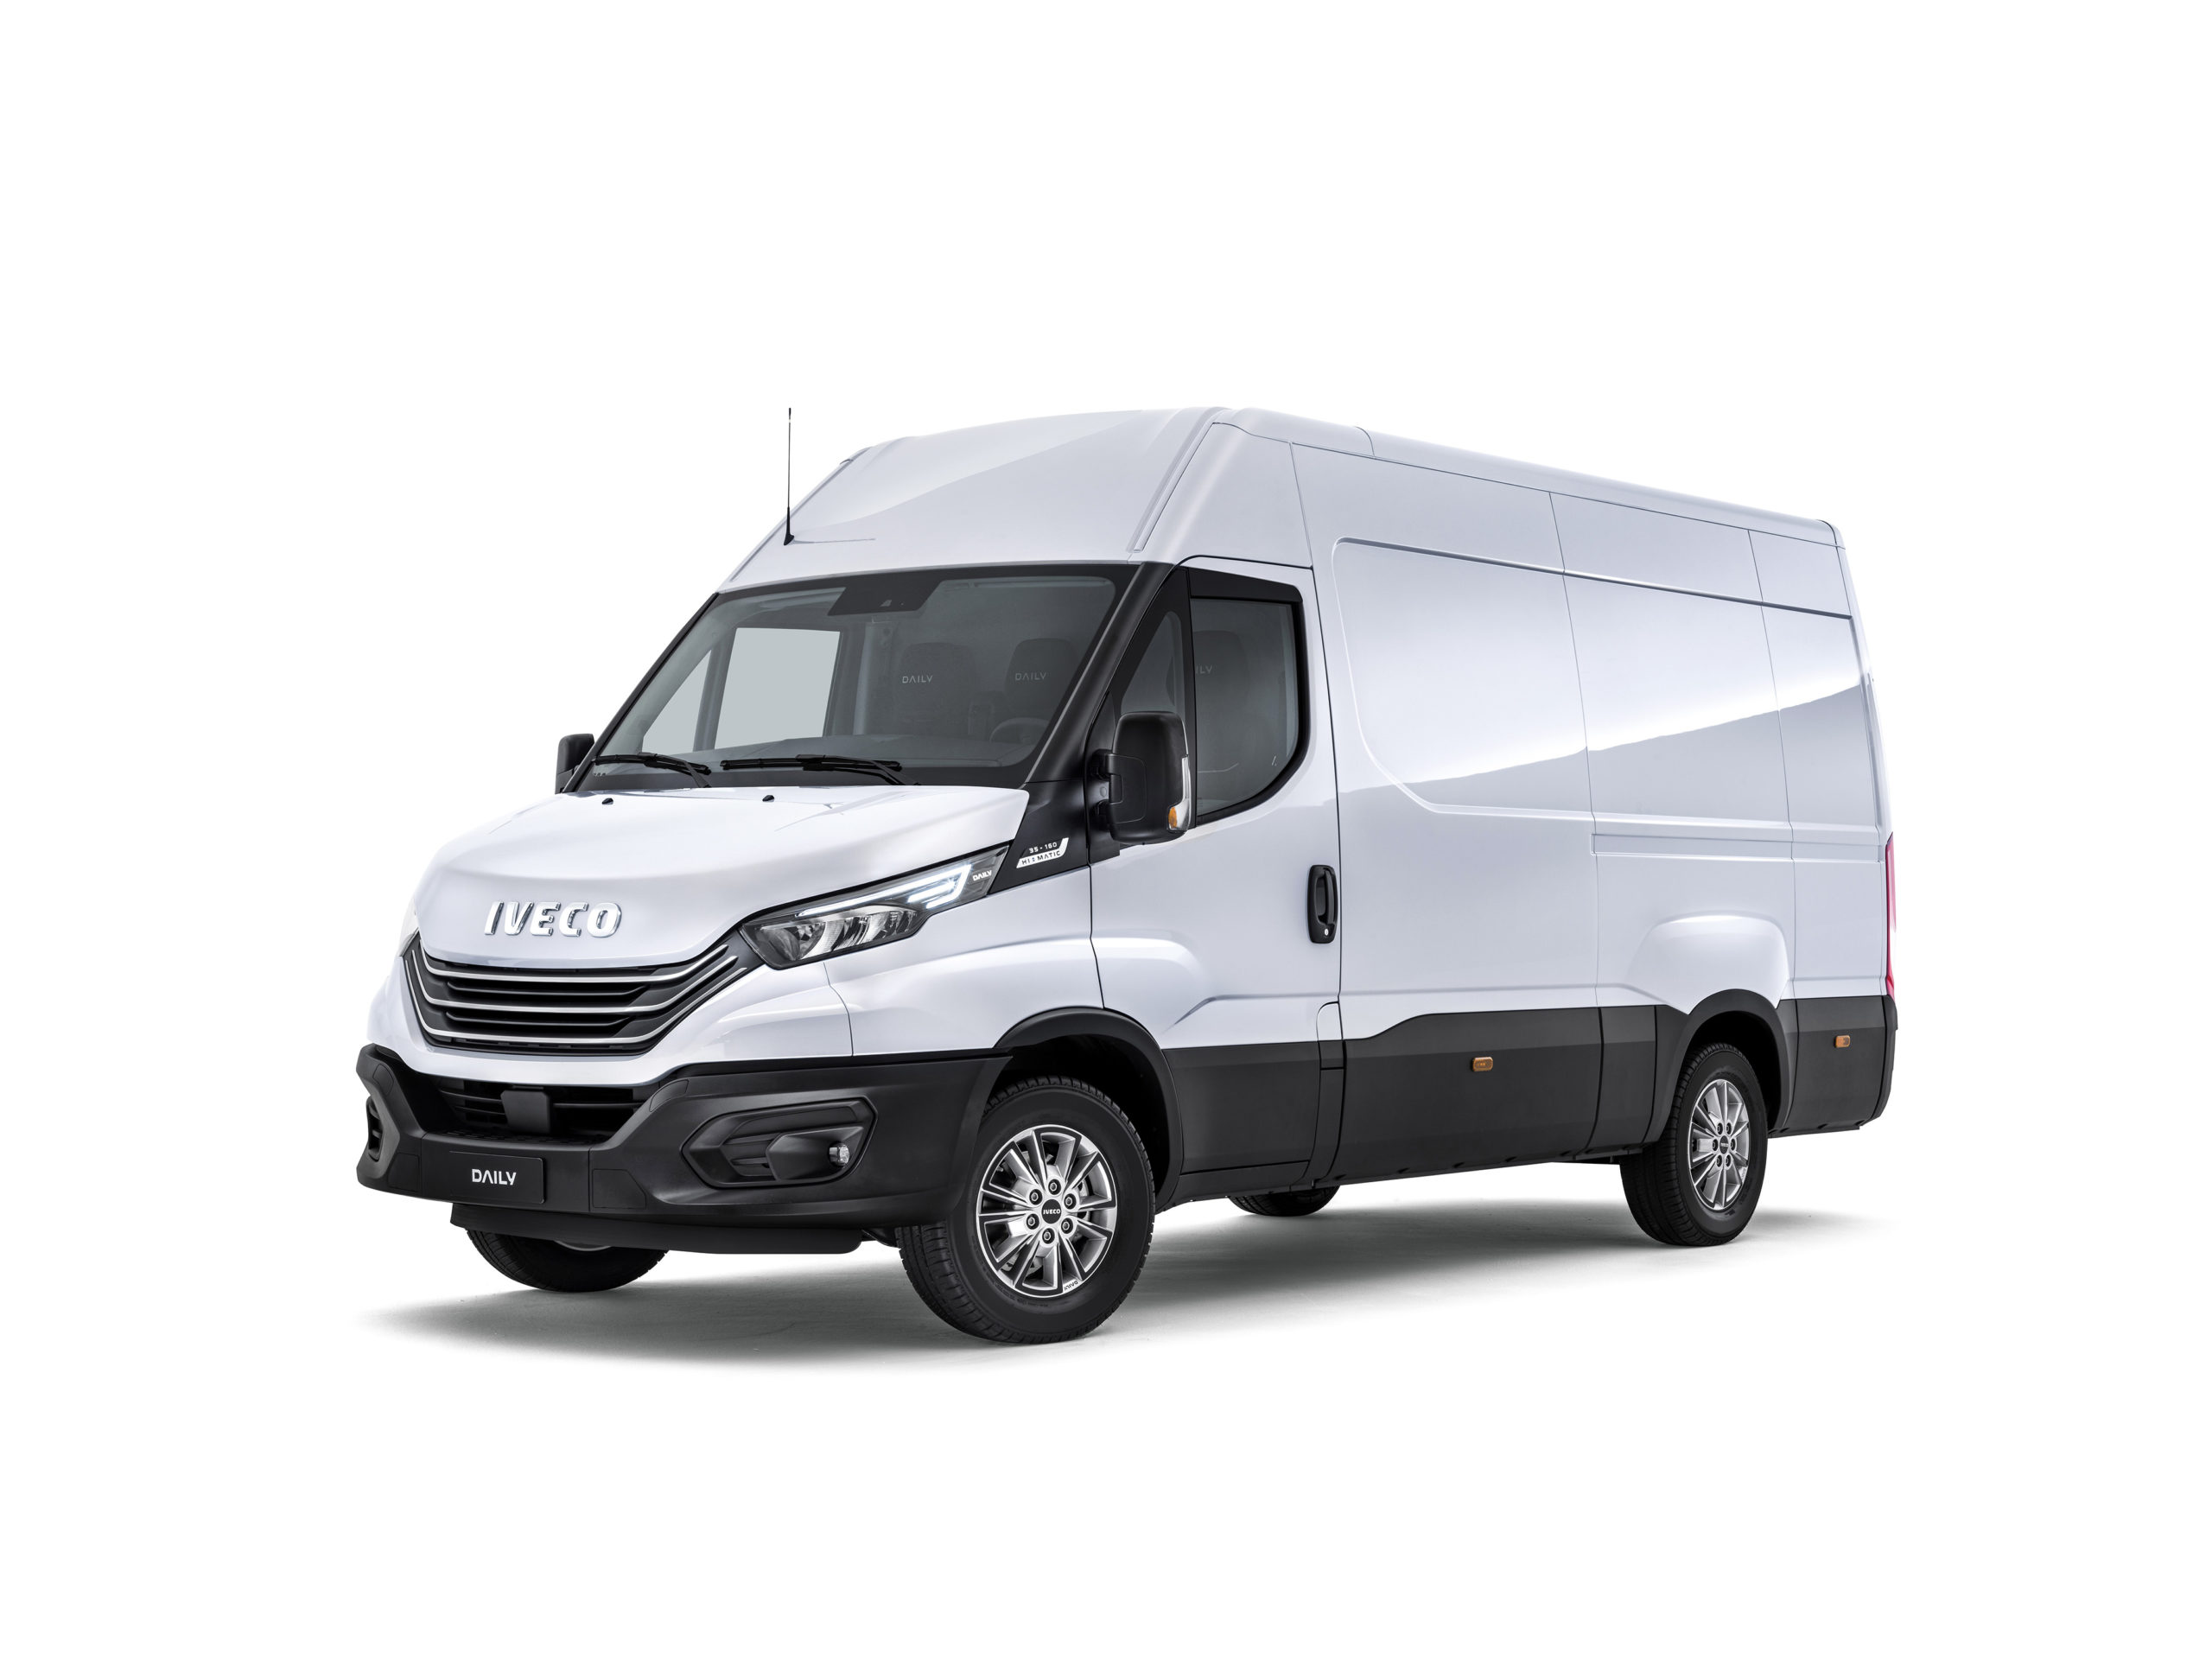 Iveco Daily 2019. Iveco Daily гибрид. Iveco Daily 2016. Iveco Daily цельнометаллический. Ивеко дейли цельнометаллический